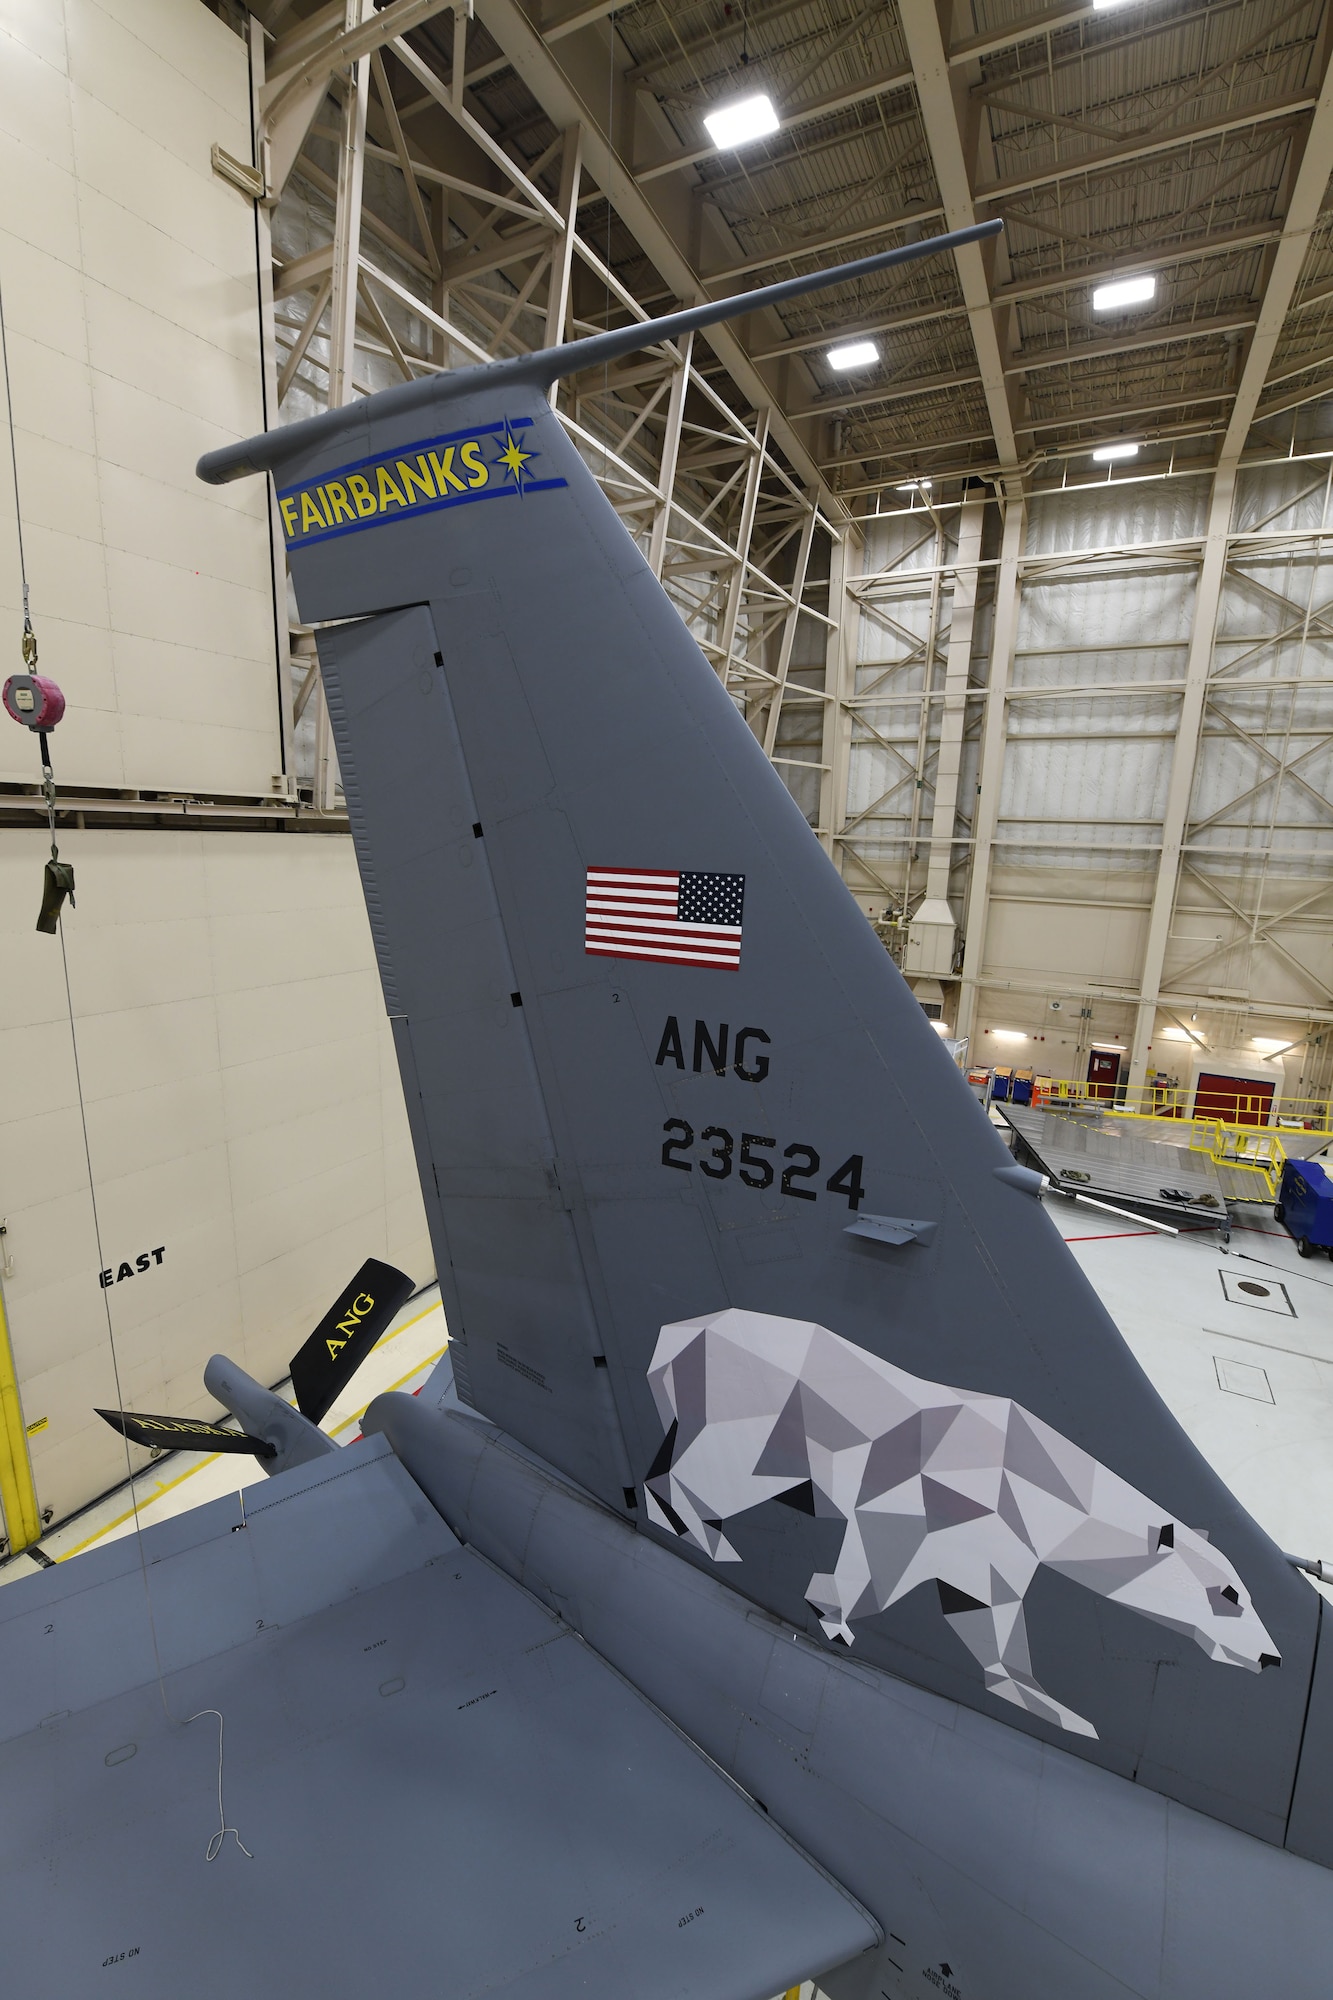 Tech. Sgt. Matthew Barker and Airman 1st Class Caleb Sawyer of the 168th Maintenance Group adds Fairbanks, Alaska to the wing's flagship KC-135 Stratotanker and installs the new Polar Bear design on the tail flash dedicated to Fairbanks, Alaska, Dec. 18, 2020. The Alaska Air National Guard's 168th Wing honors Fairbanks, Alaska, the city it calls home, with the dedication of the wing's flagship aircraft. A flagship aircraft is a dedicated aircraft with the wing commander and the dedicated crew chiefs' names on it and is maintained to the highest standards. It is the jet that represents the wing. The dedicated crew chiefs for the flagship are Tech. Sgt. Robert Albaugh and Staff Sgt. Elliot St. Laurent. (U.S. Air National Guard photo by Senior Master Sgt. Julie Avey)